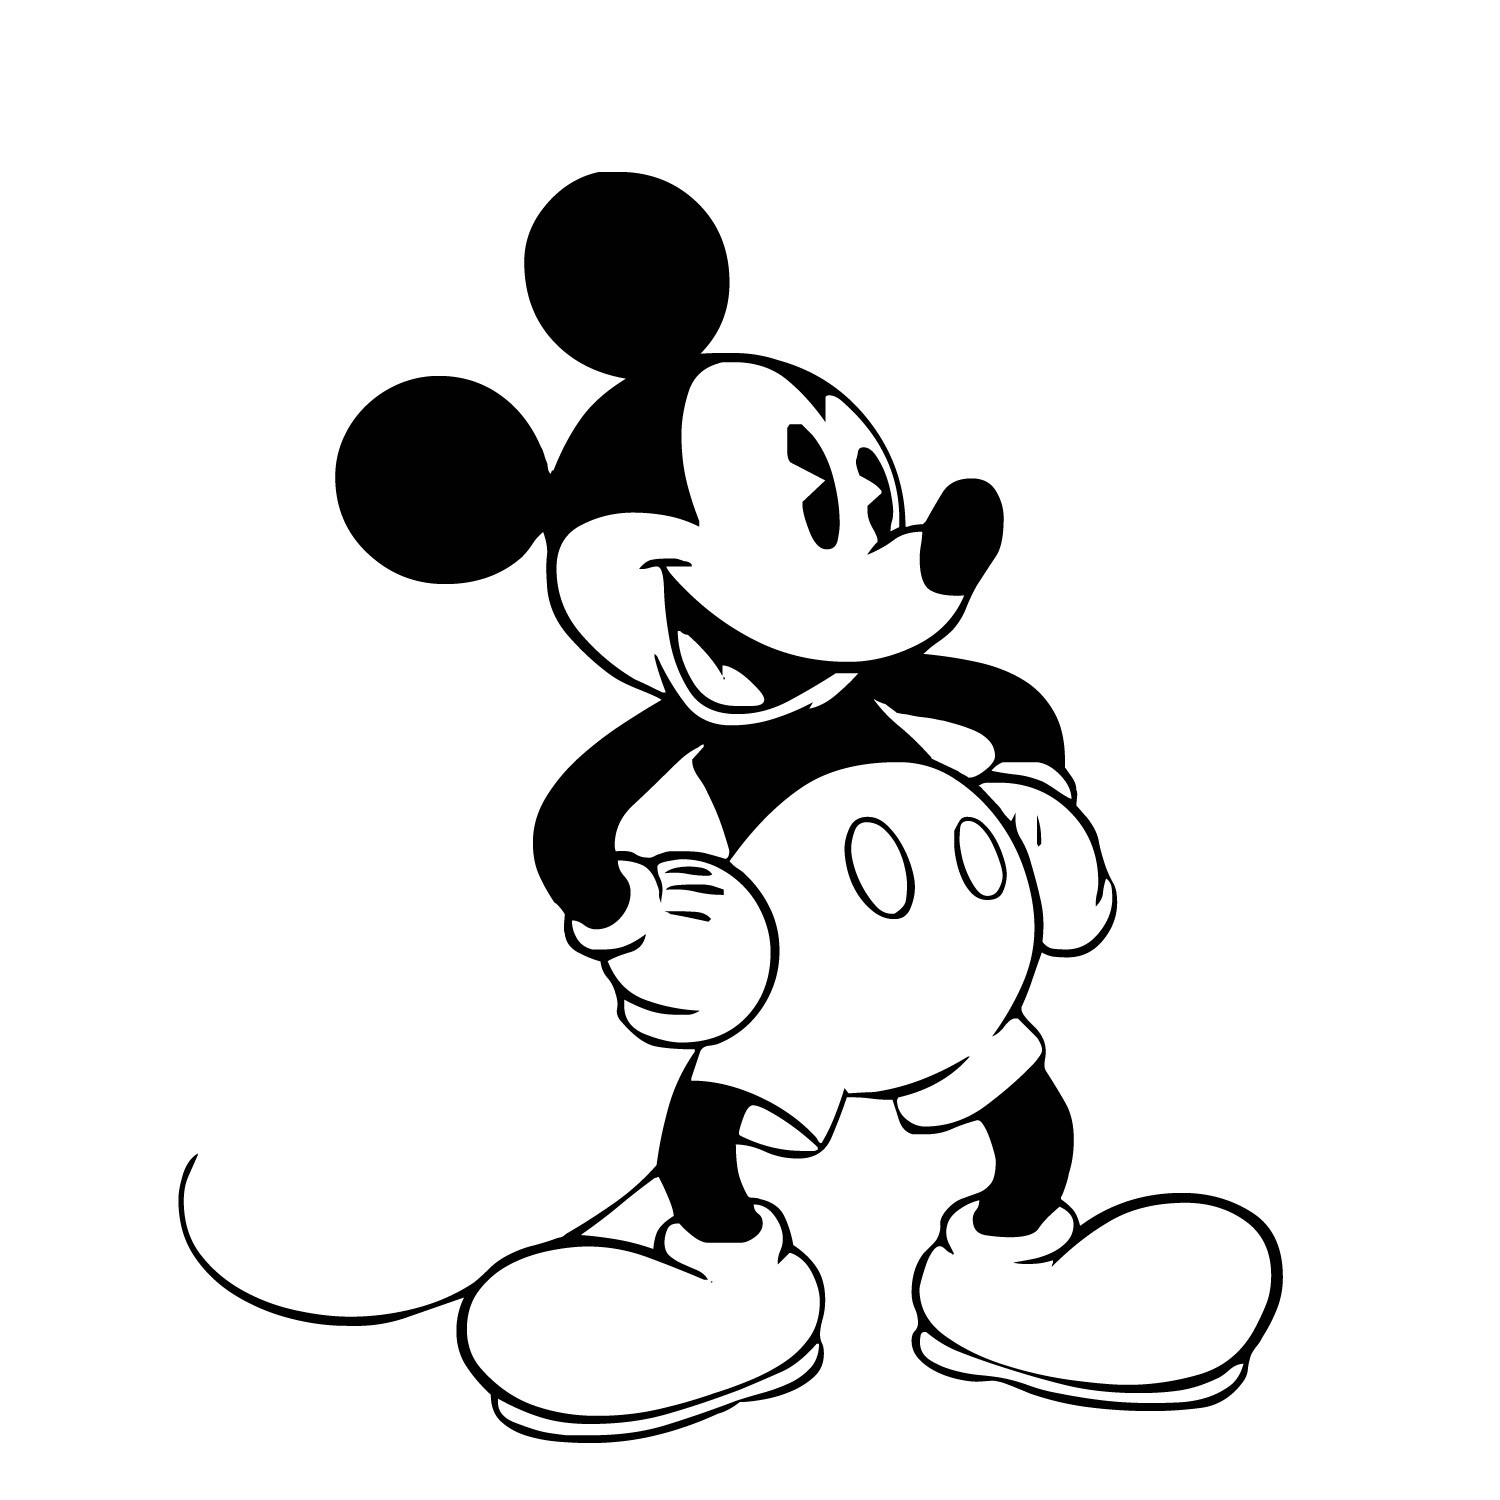 mickey mouse animated clip art - photo #36